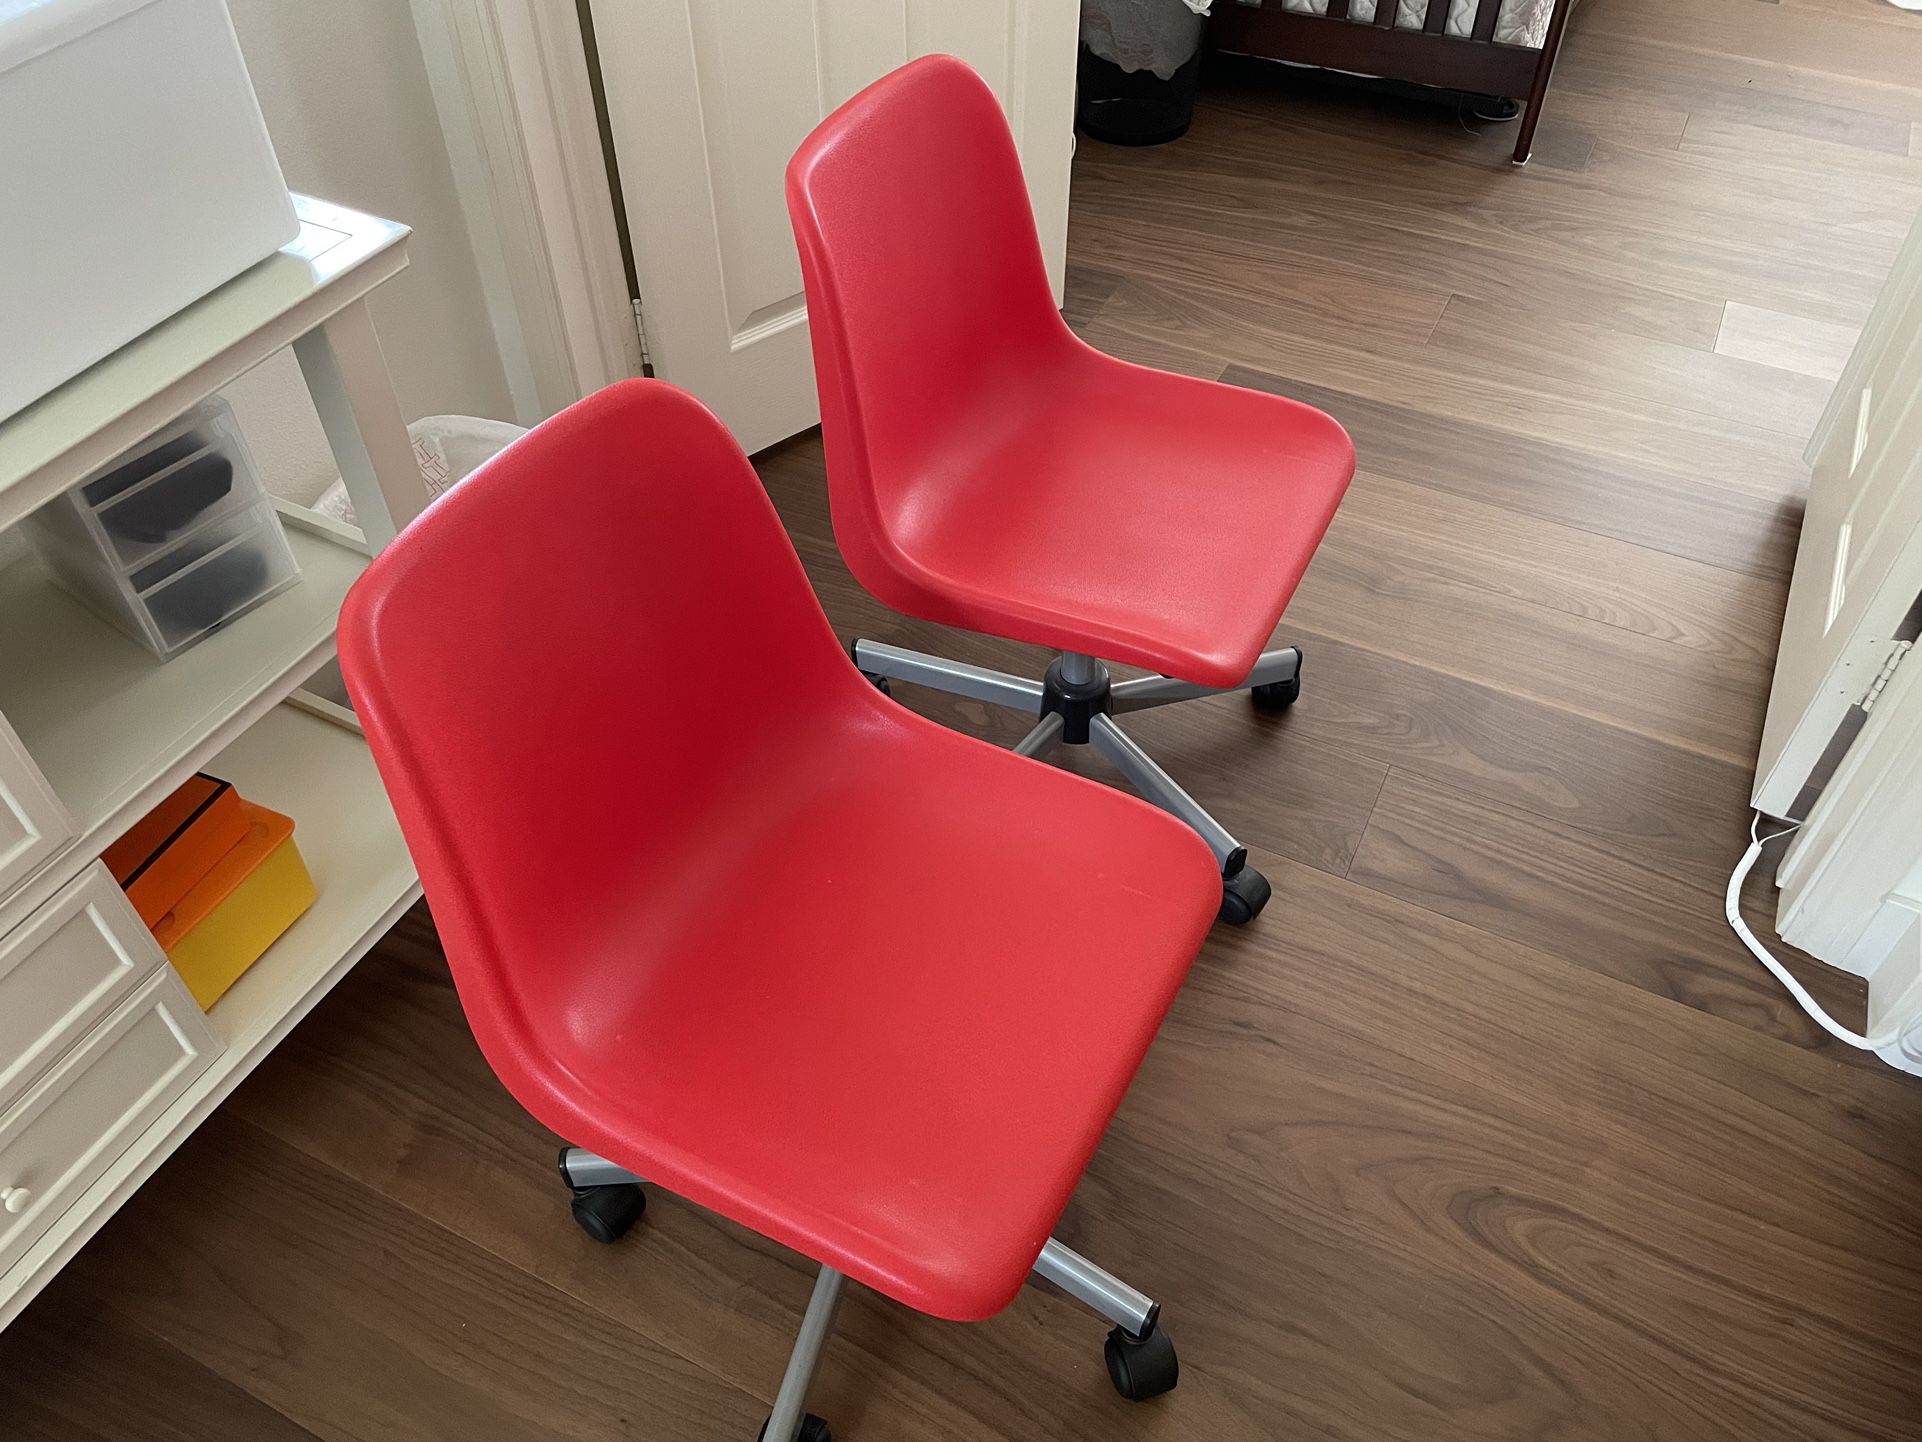 2 IKEA Desk Chairs With Wheels